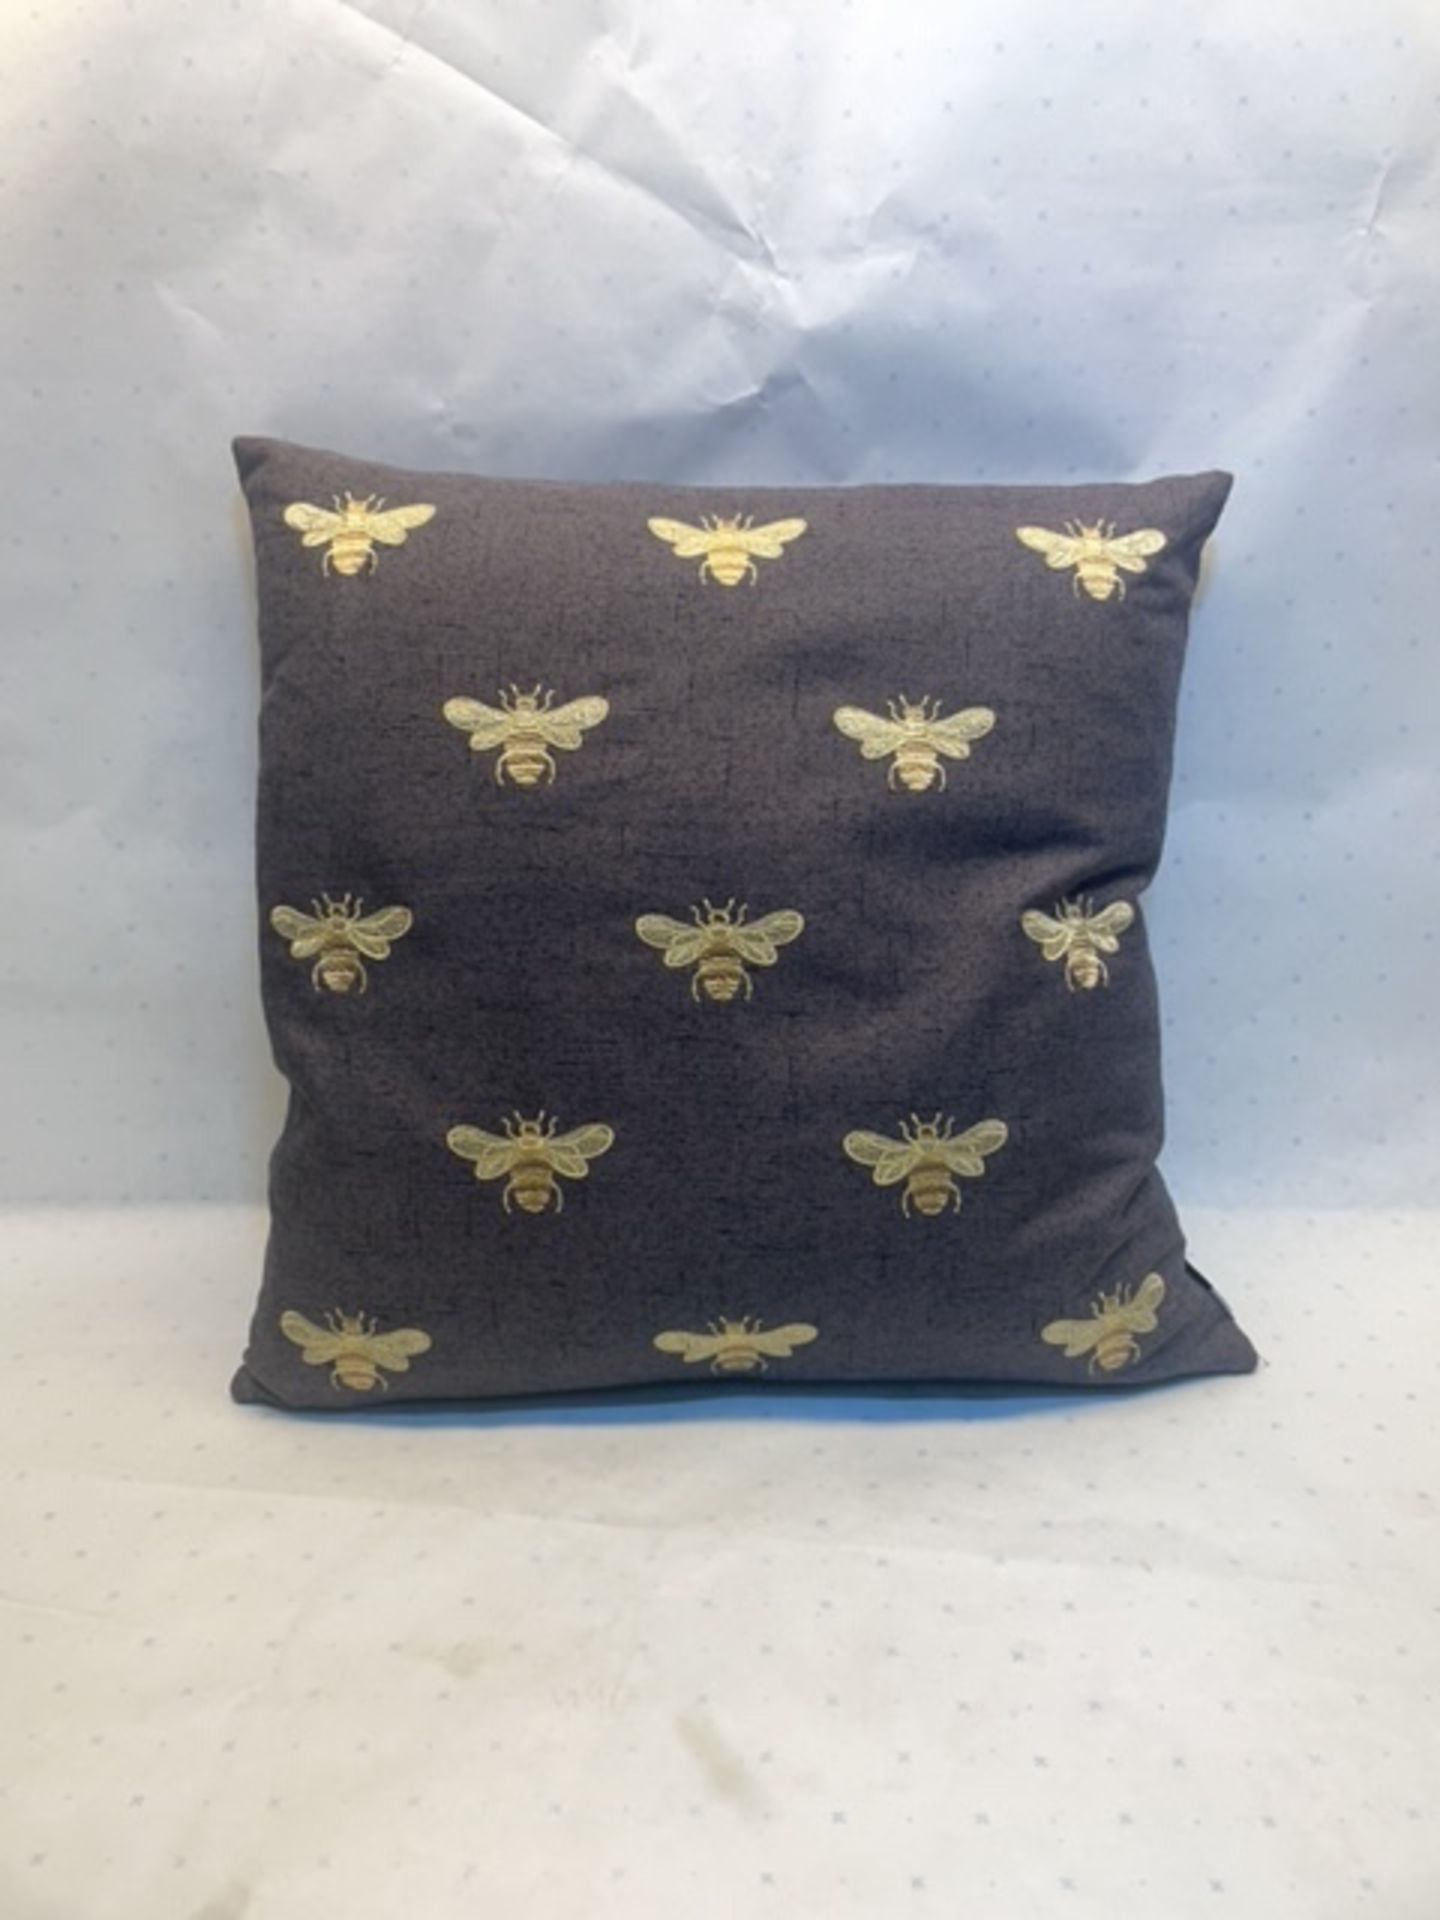 2 X Grey Cushions with Embroidered Bees - Image 2 of 3